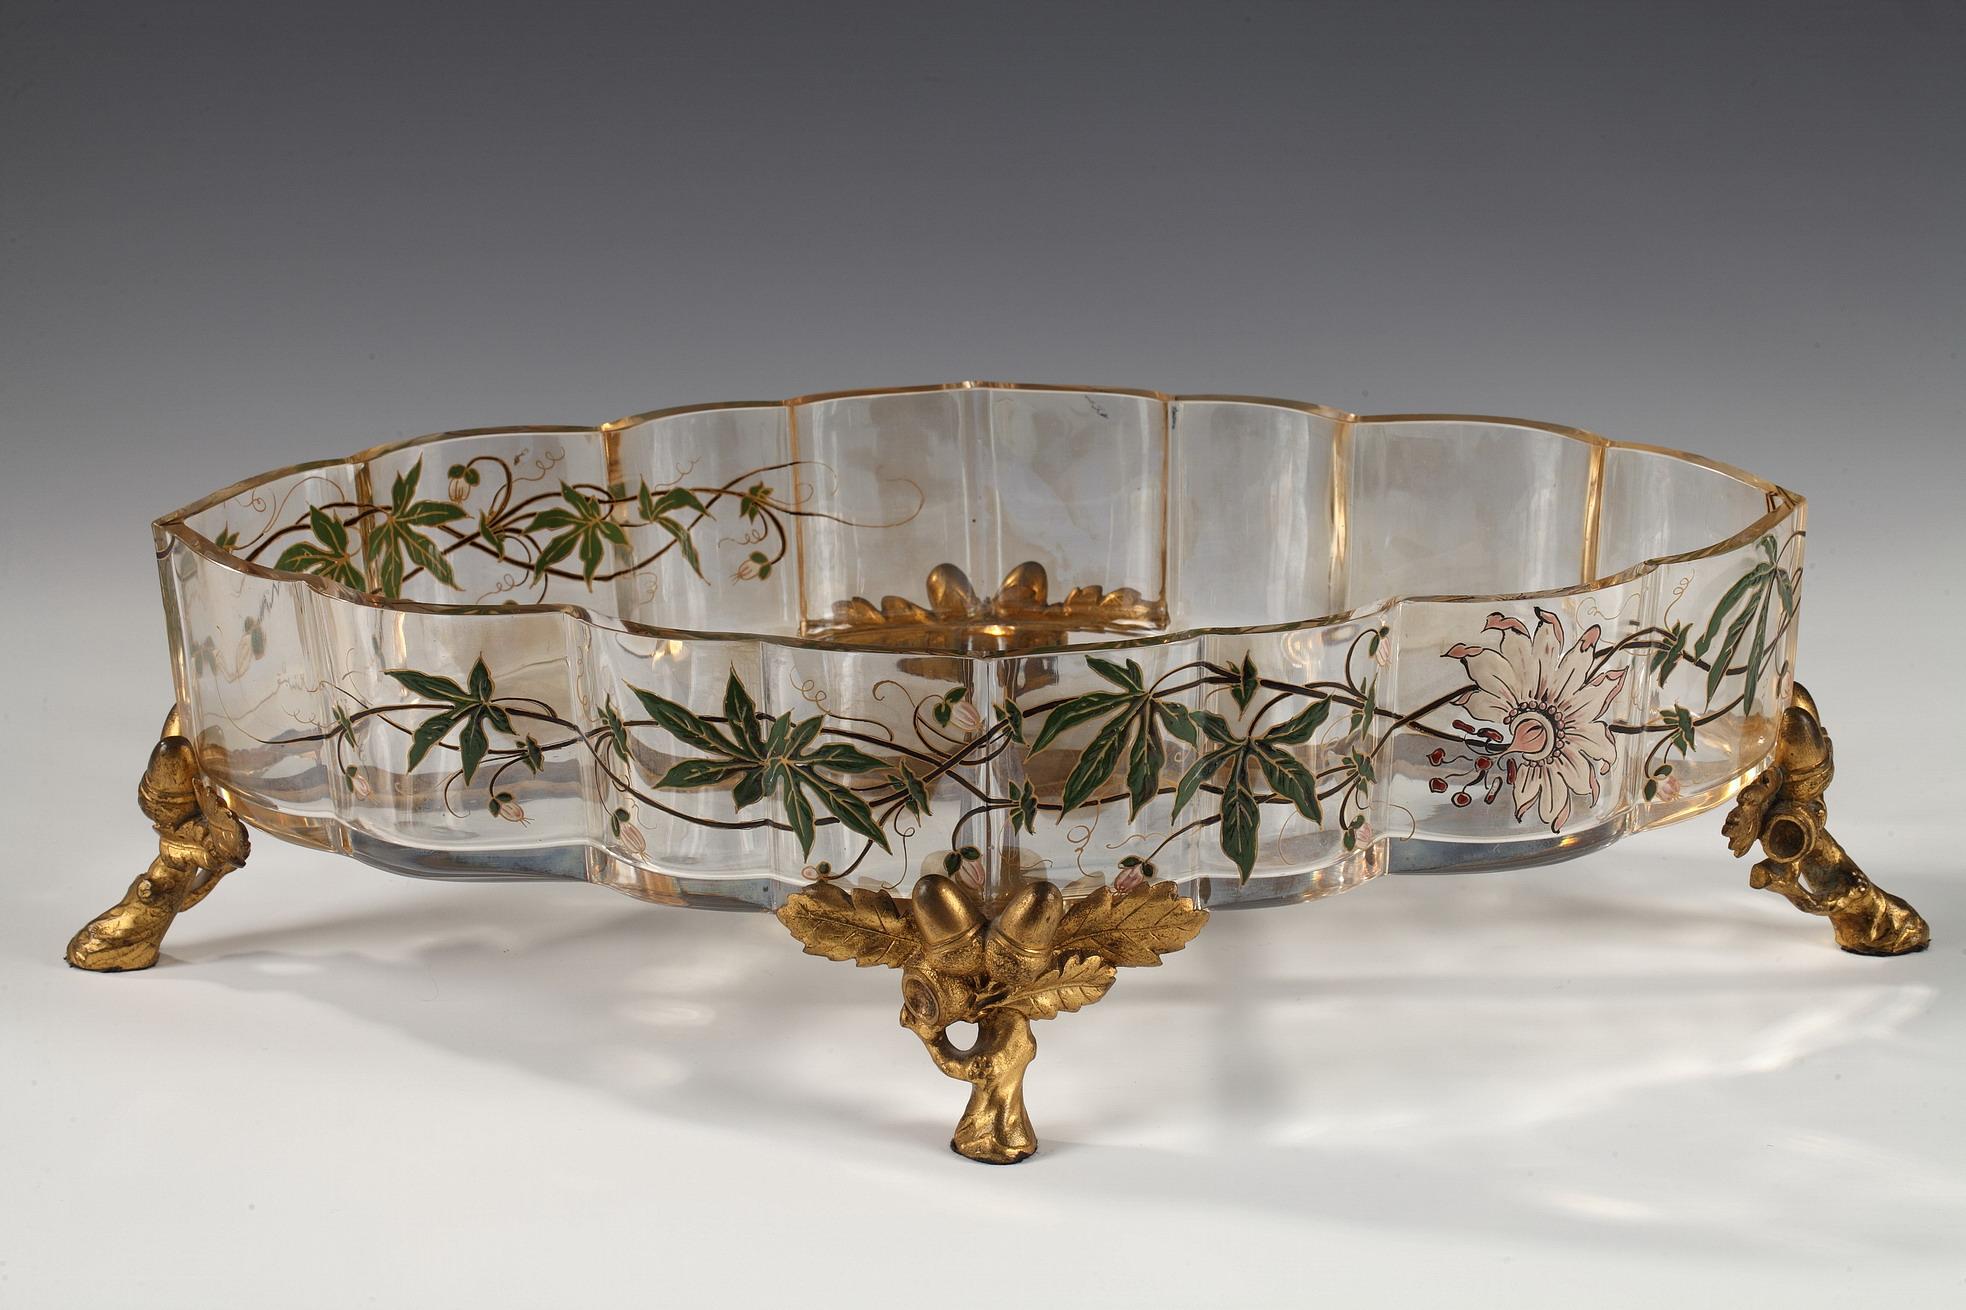 Mark of Baccarat on the mount
1 crystal planter + 1 bronze mount

A charming Baccarat crystal plant pot with a polychrome foliate enameled decoration, resting on a gilt bronze mount on four foliate, brushwood and acorn feet.

The decoration and the